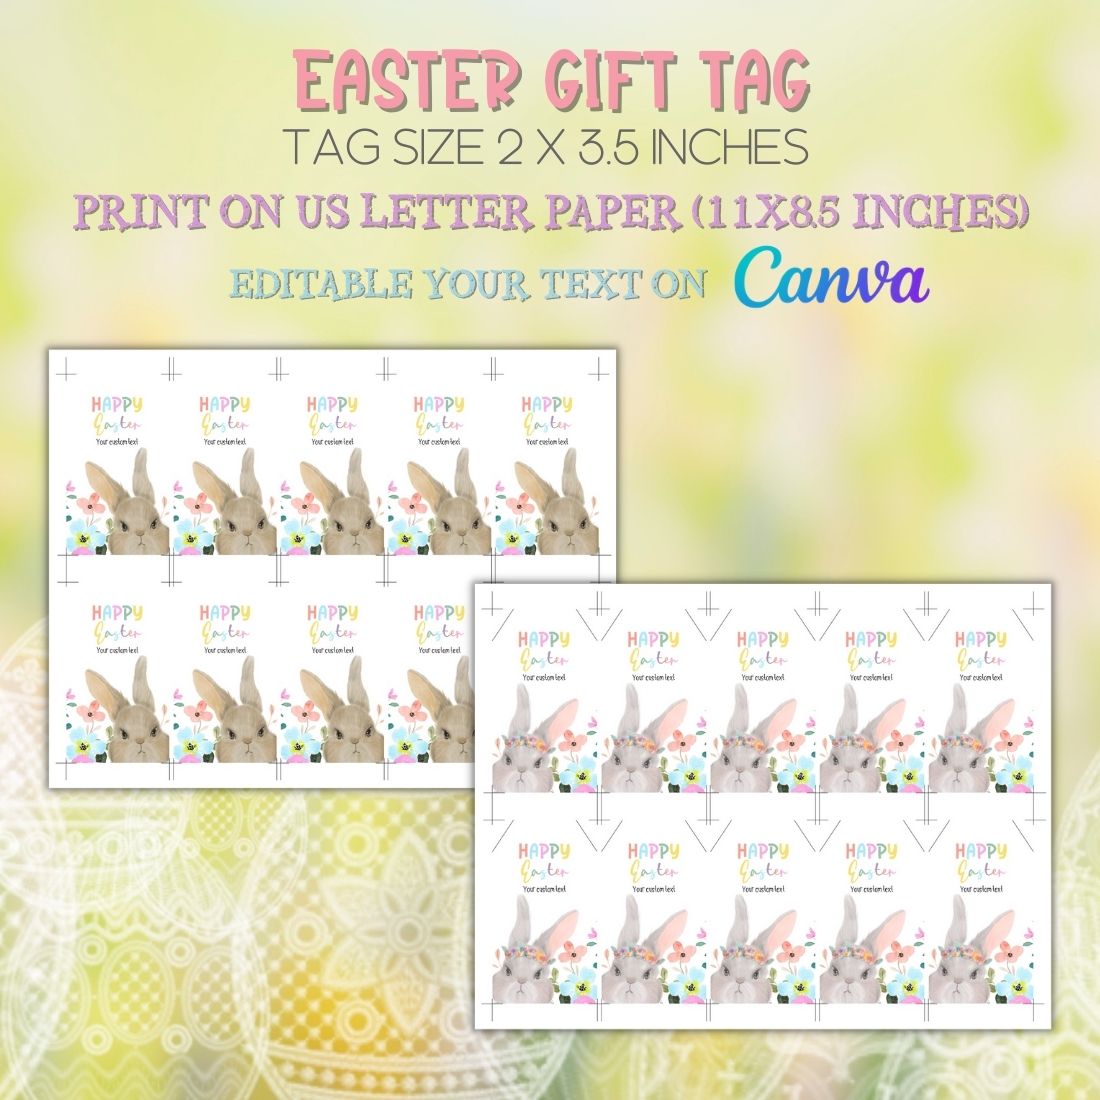 Editable gift tag, Easter Basket Gift Tag, Easter Treat Tag preview image.